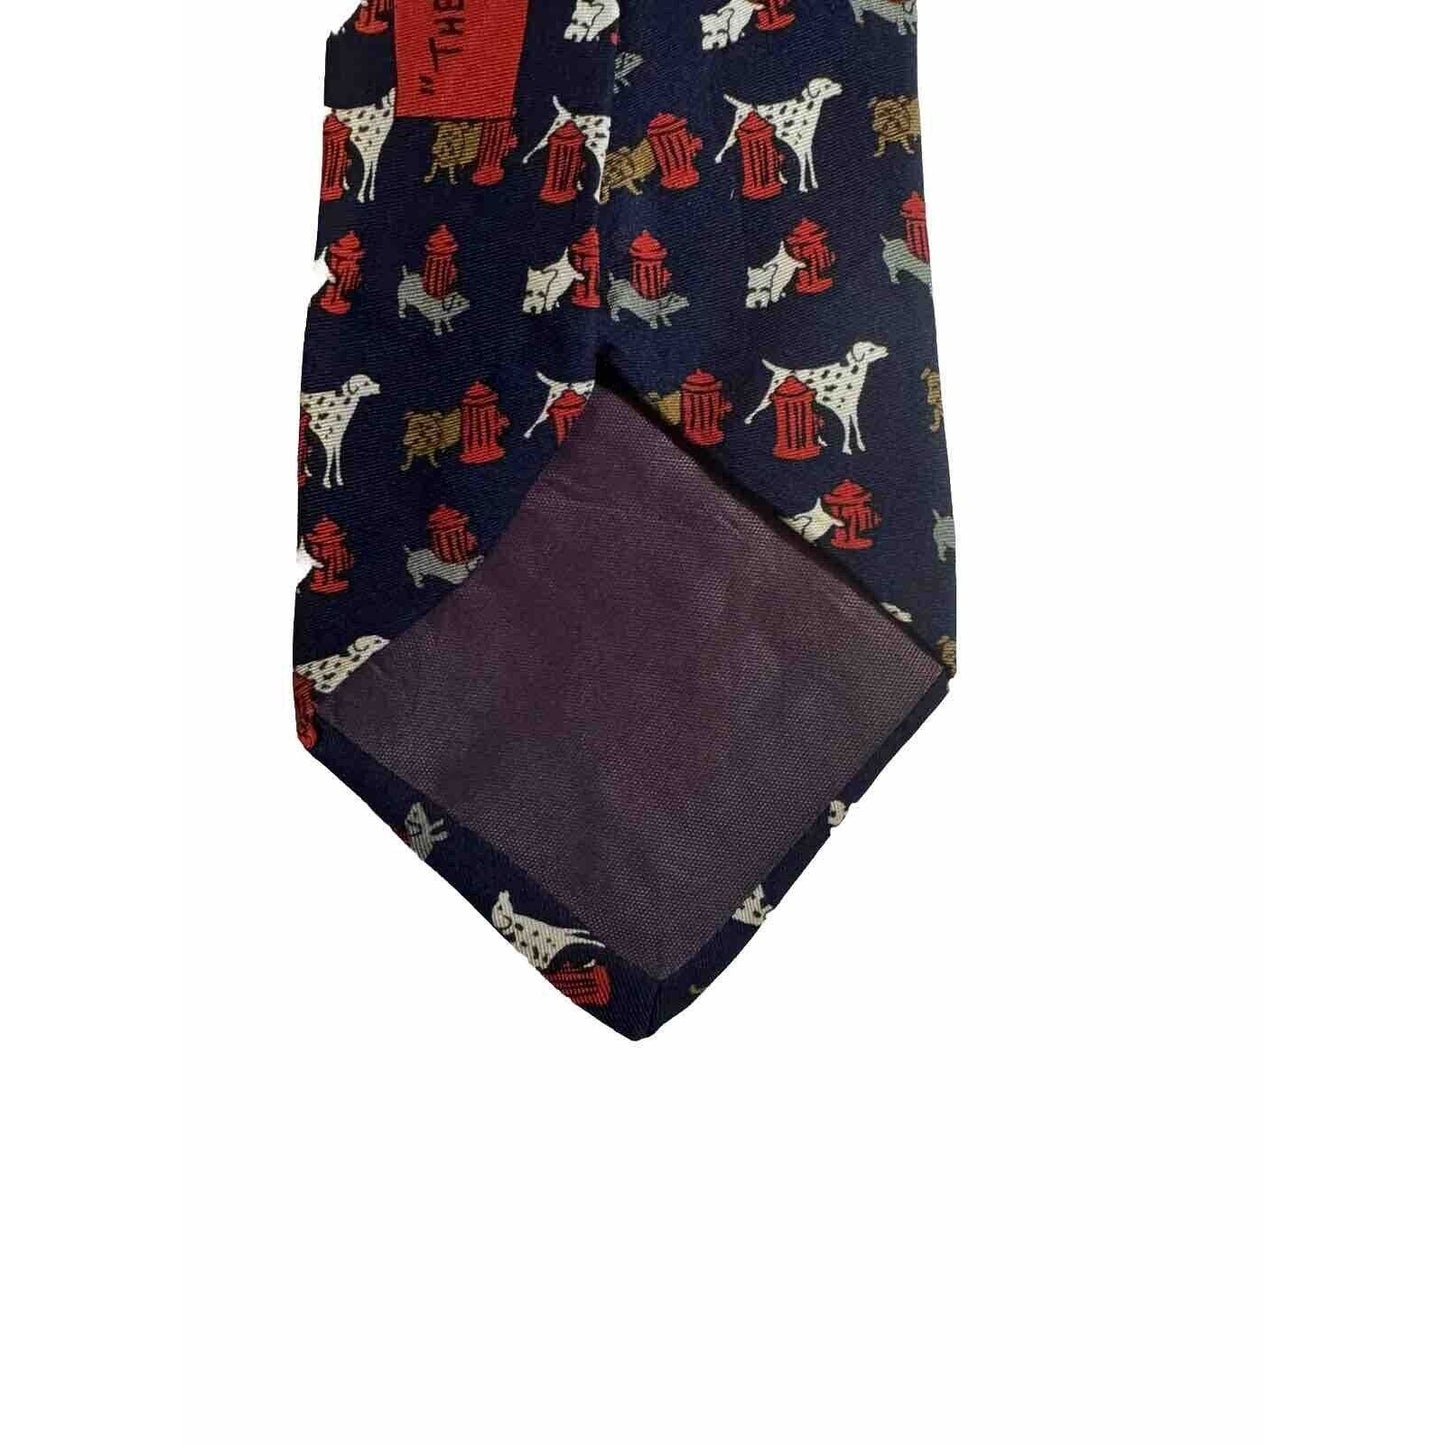 Alynn Neckwear The Pause That Refreshes Dogs Fire Hydrant Novelty Necktie